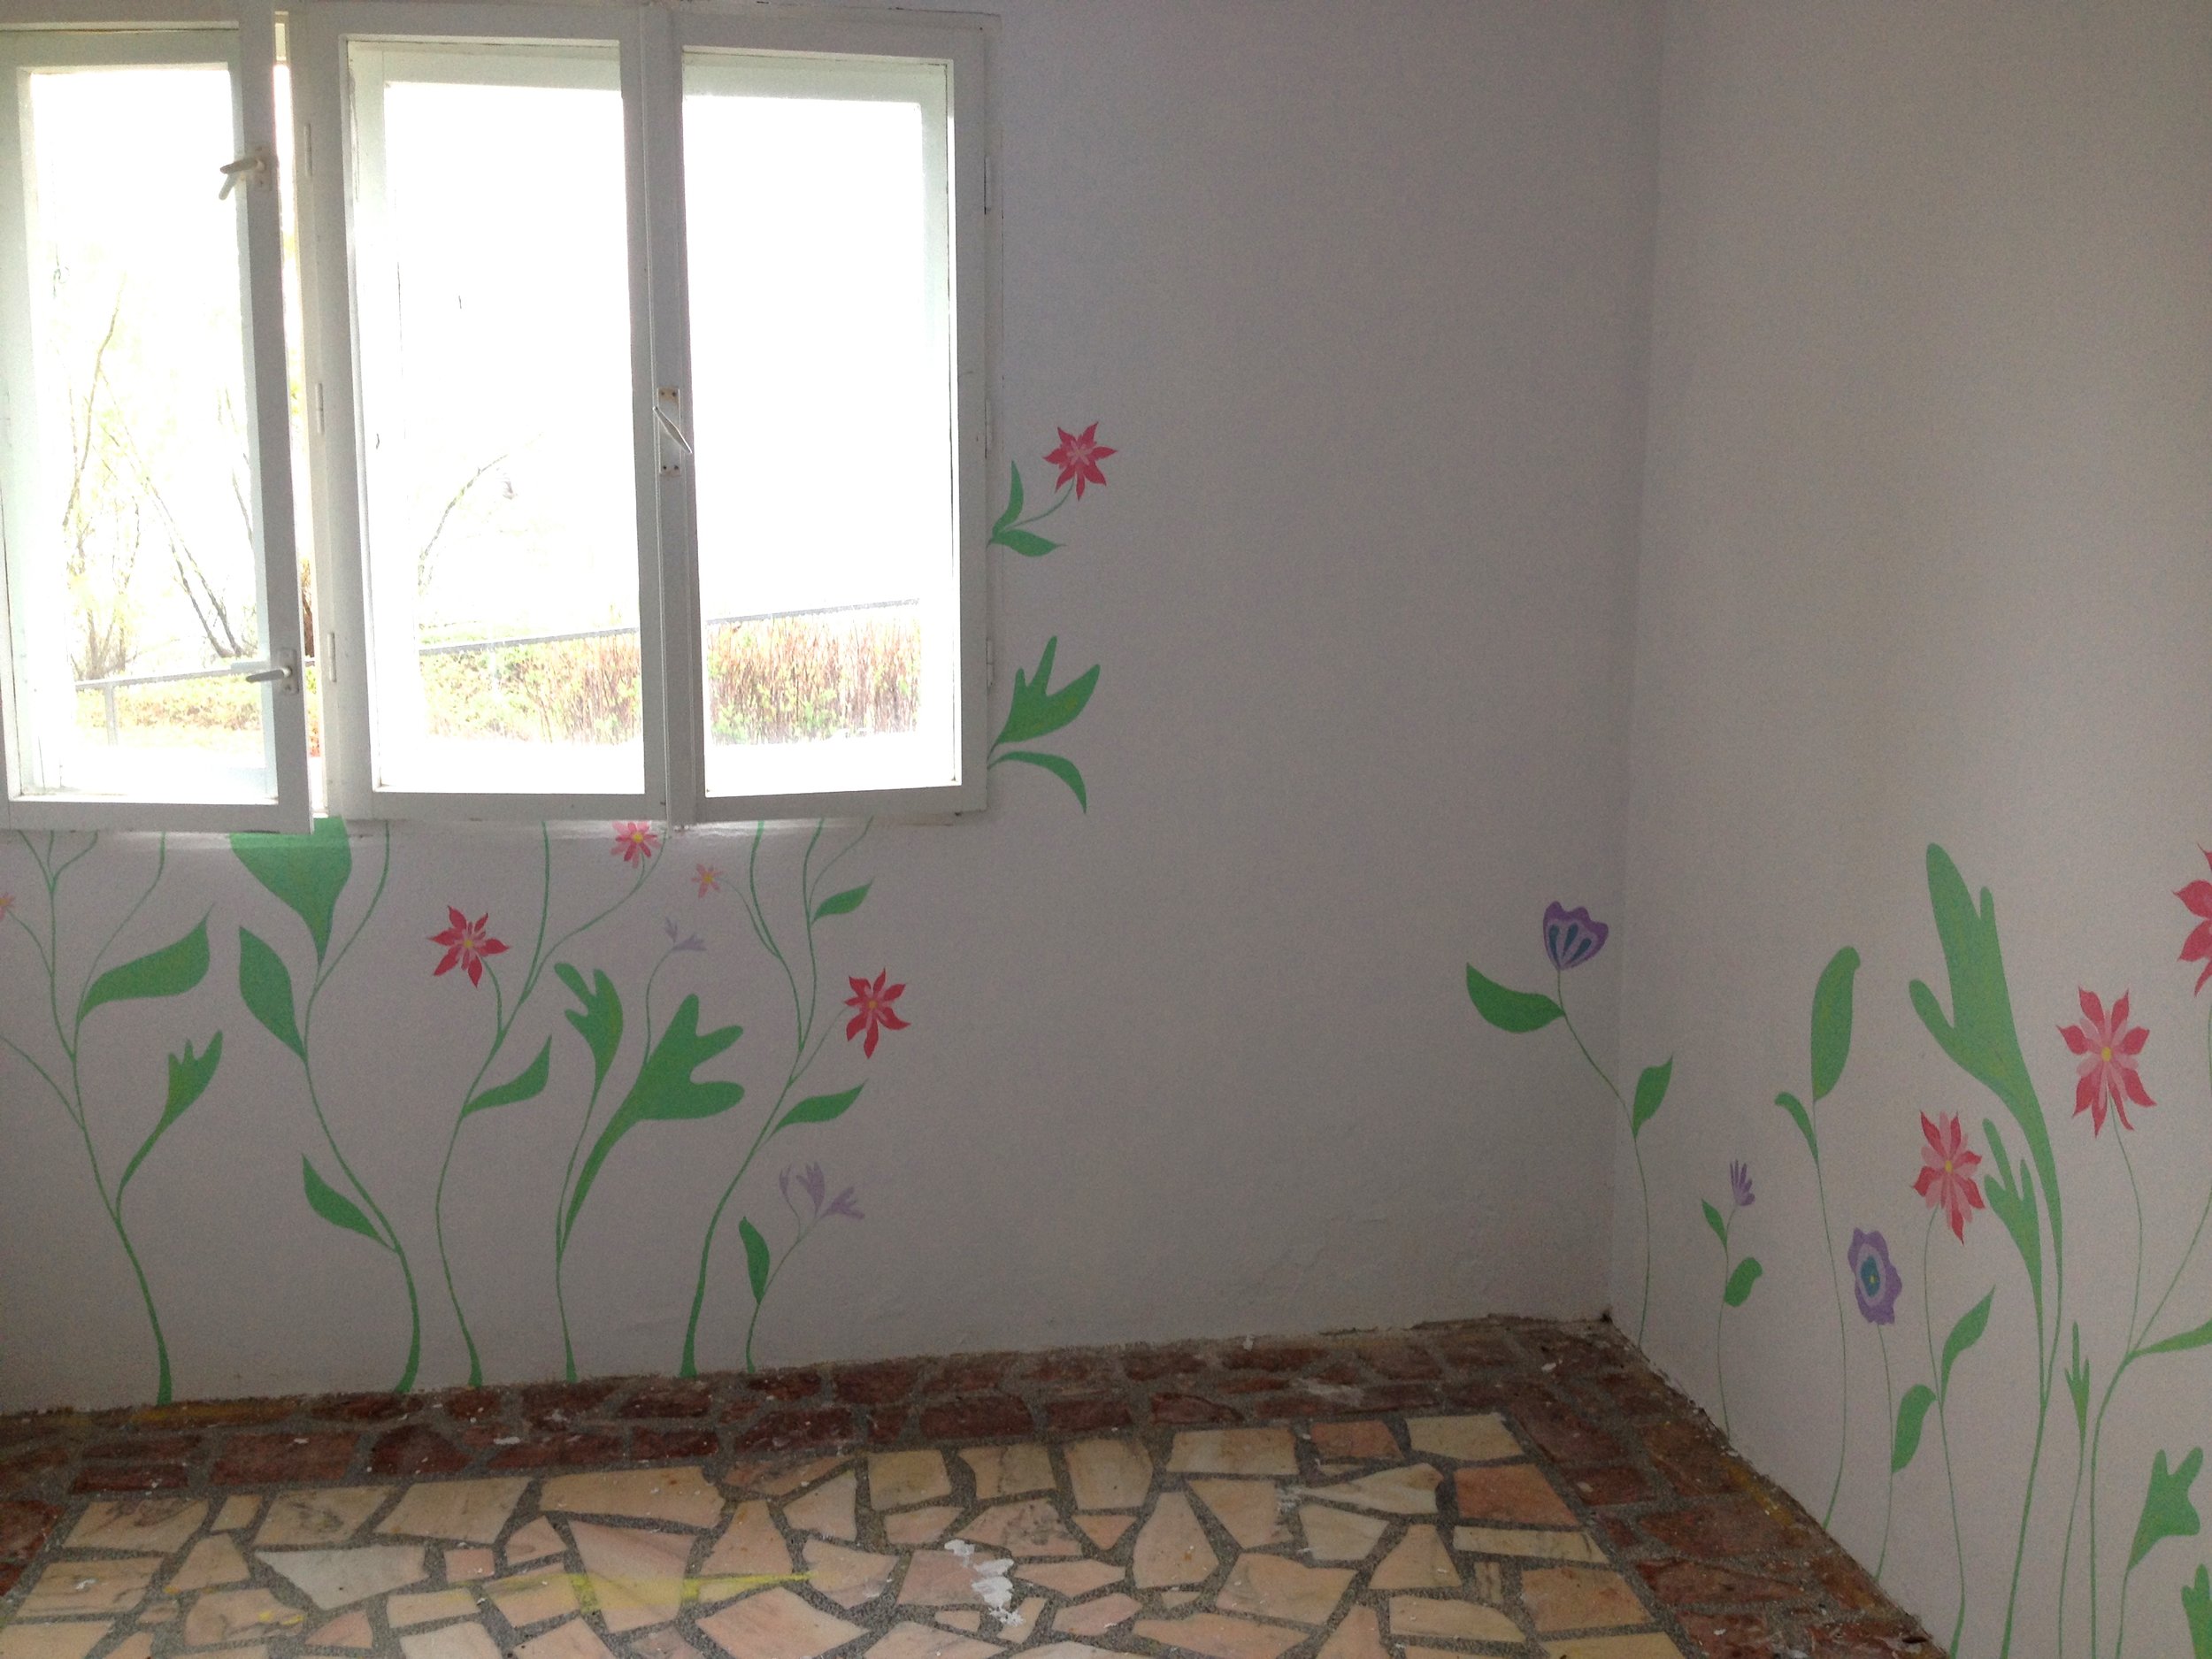 painting a garden mural in the prayer room at Casa Harilui, a retreat home for disabled children in Romania